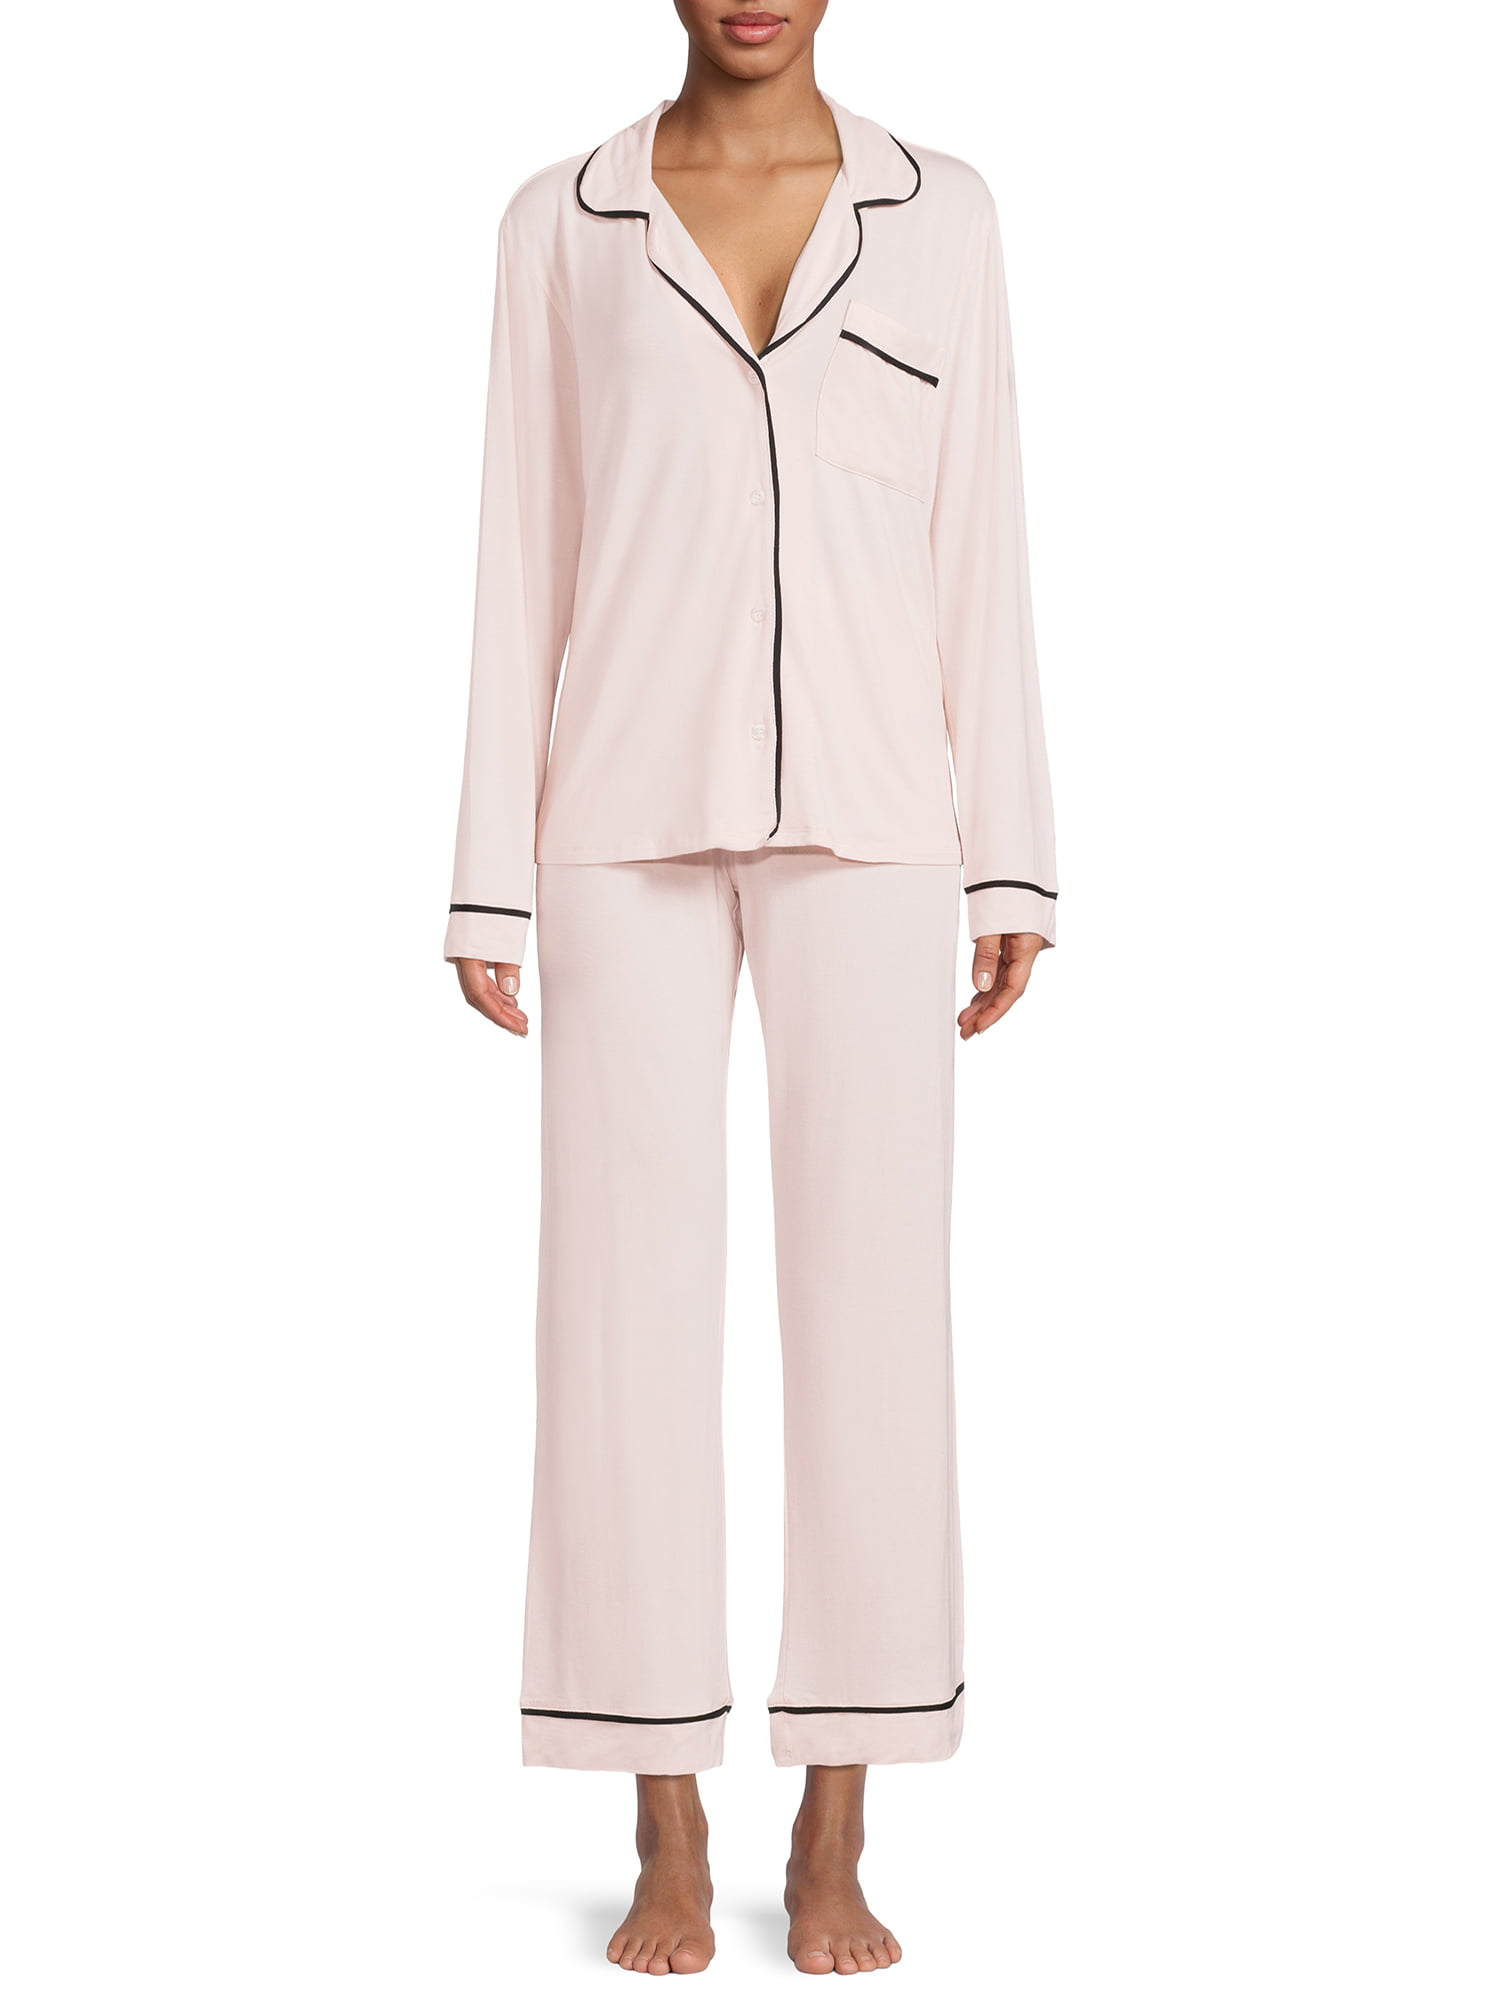 OYOANGLE Women's 2 Piece Pajama Set Silk Satin Lace Trim Striped Jacquard  Lapel Collar Long sleeve Top and Pants PJ Set Dusty Pink S at   Women's Clothing store